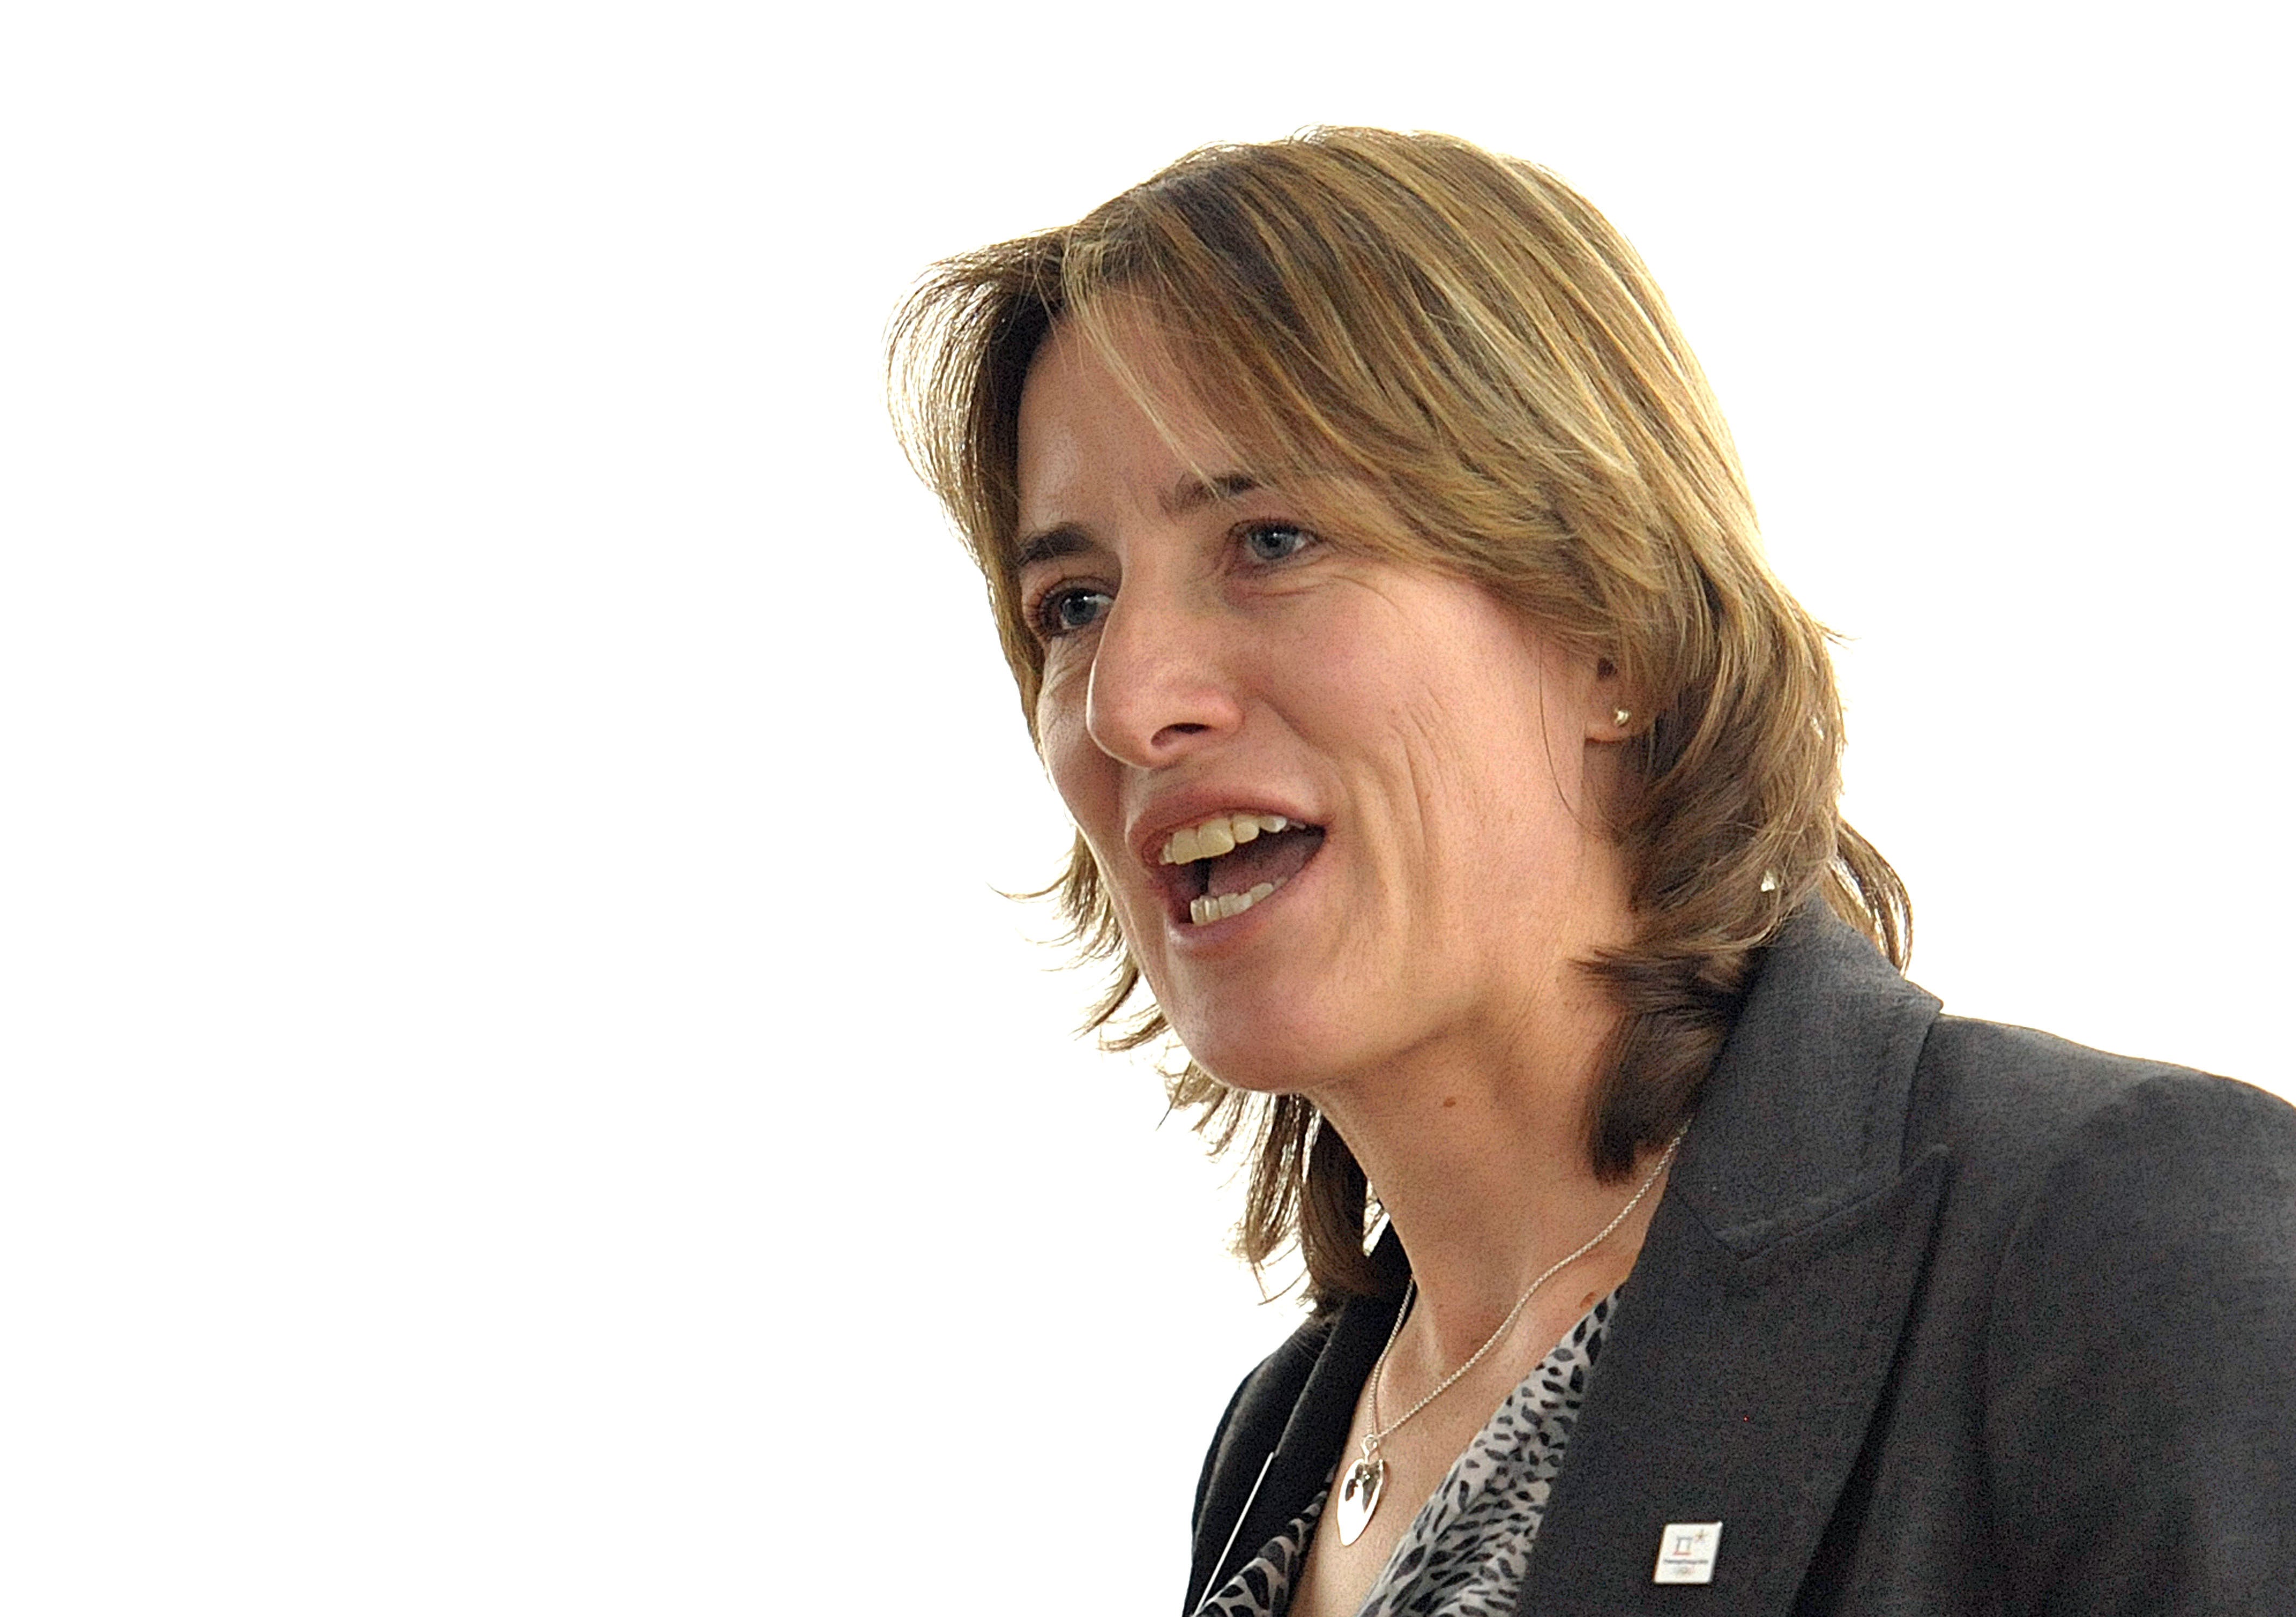 UK Sport chair Dame Katherine Grainger says accessibility and medal potential will determine sports’ funding levels ahead of the next Winter Olympics